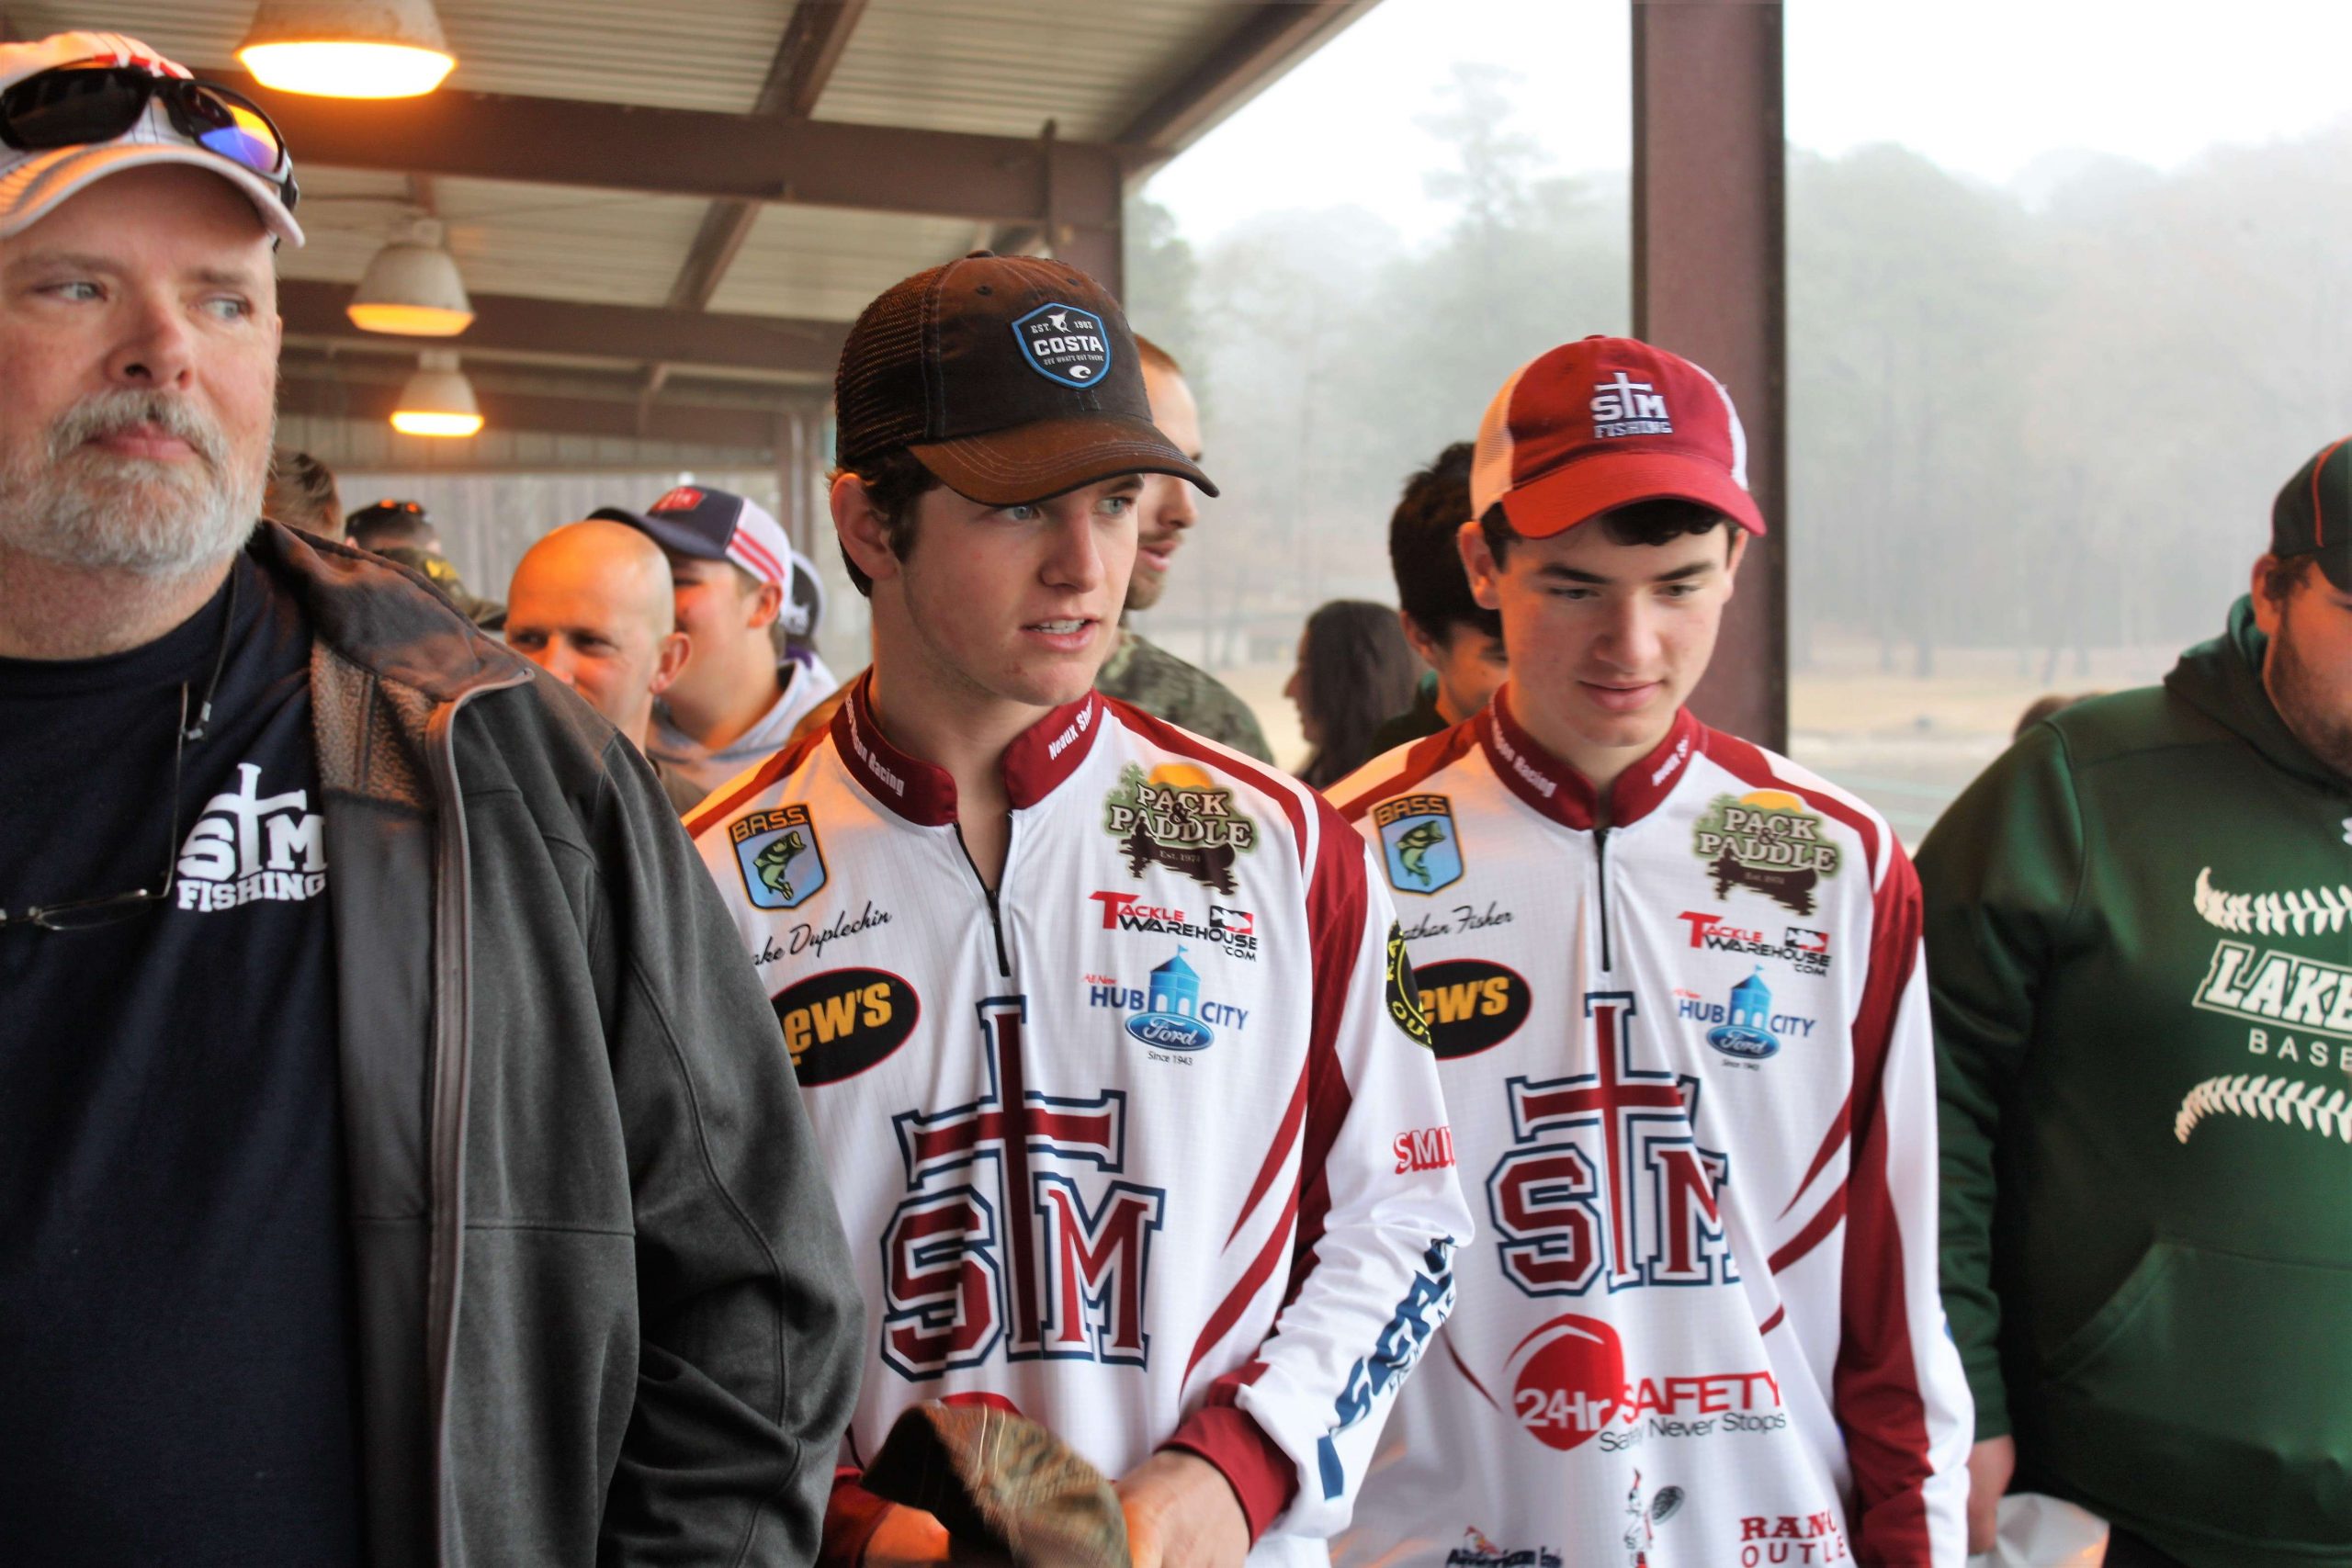 These St. Thomas More (LA) anglers look sharp on Saturday afternoon.